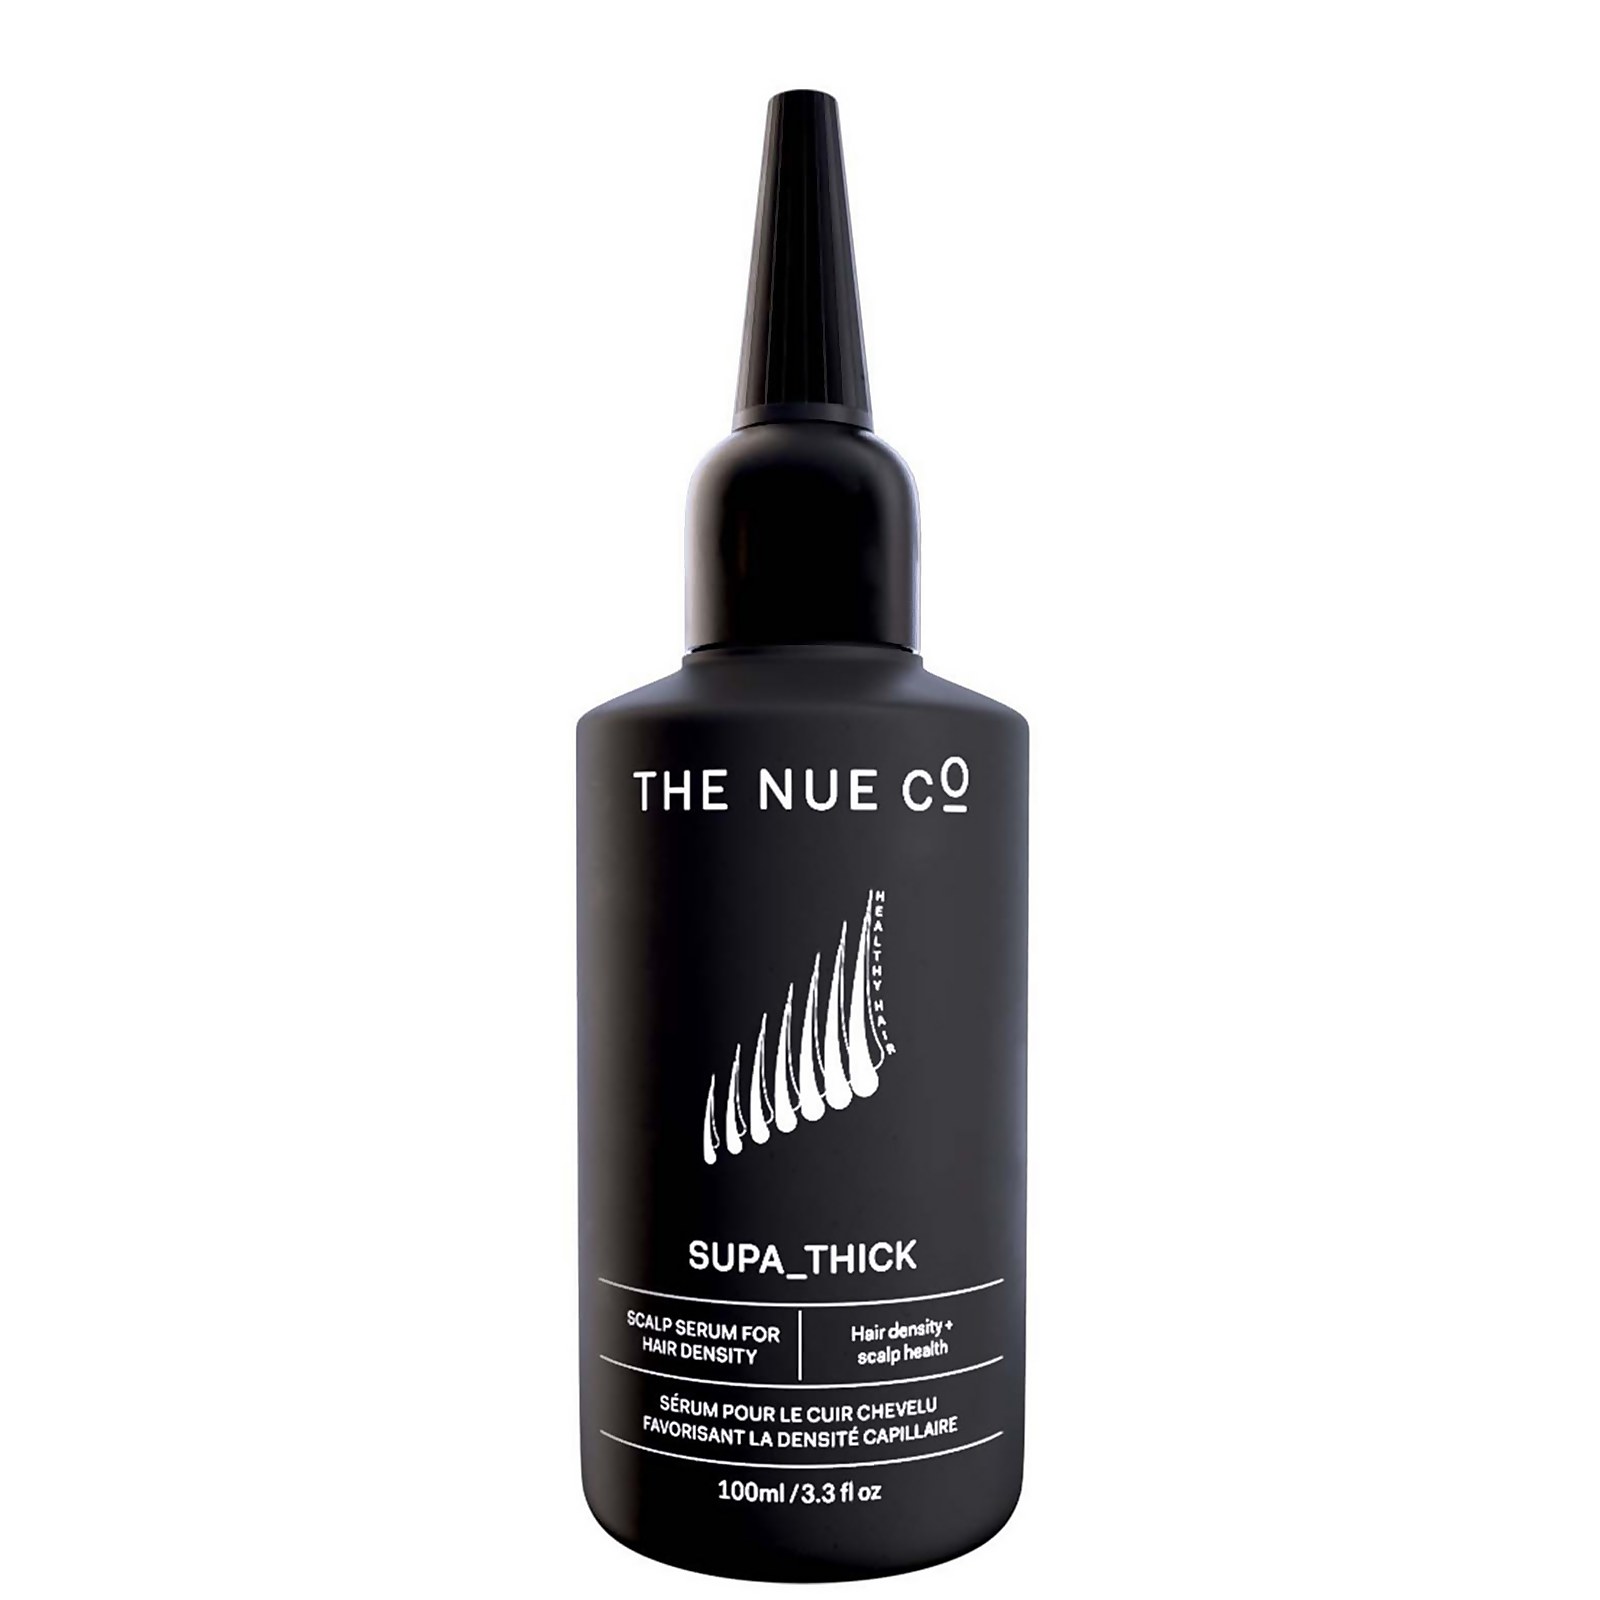 The Nue Co Supa Thick Scalp Serum With Rosemary 4 oz/ 100 ml In Colorless